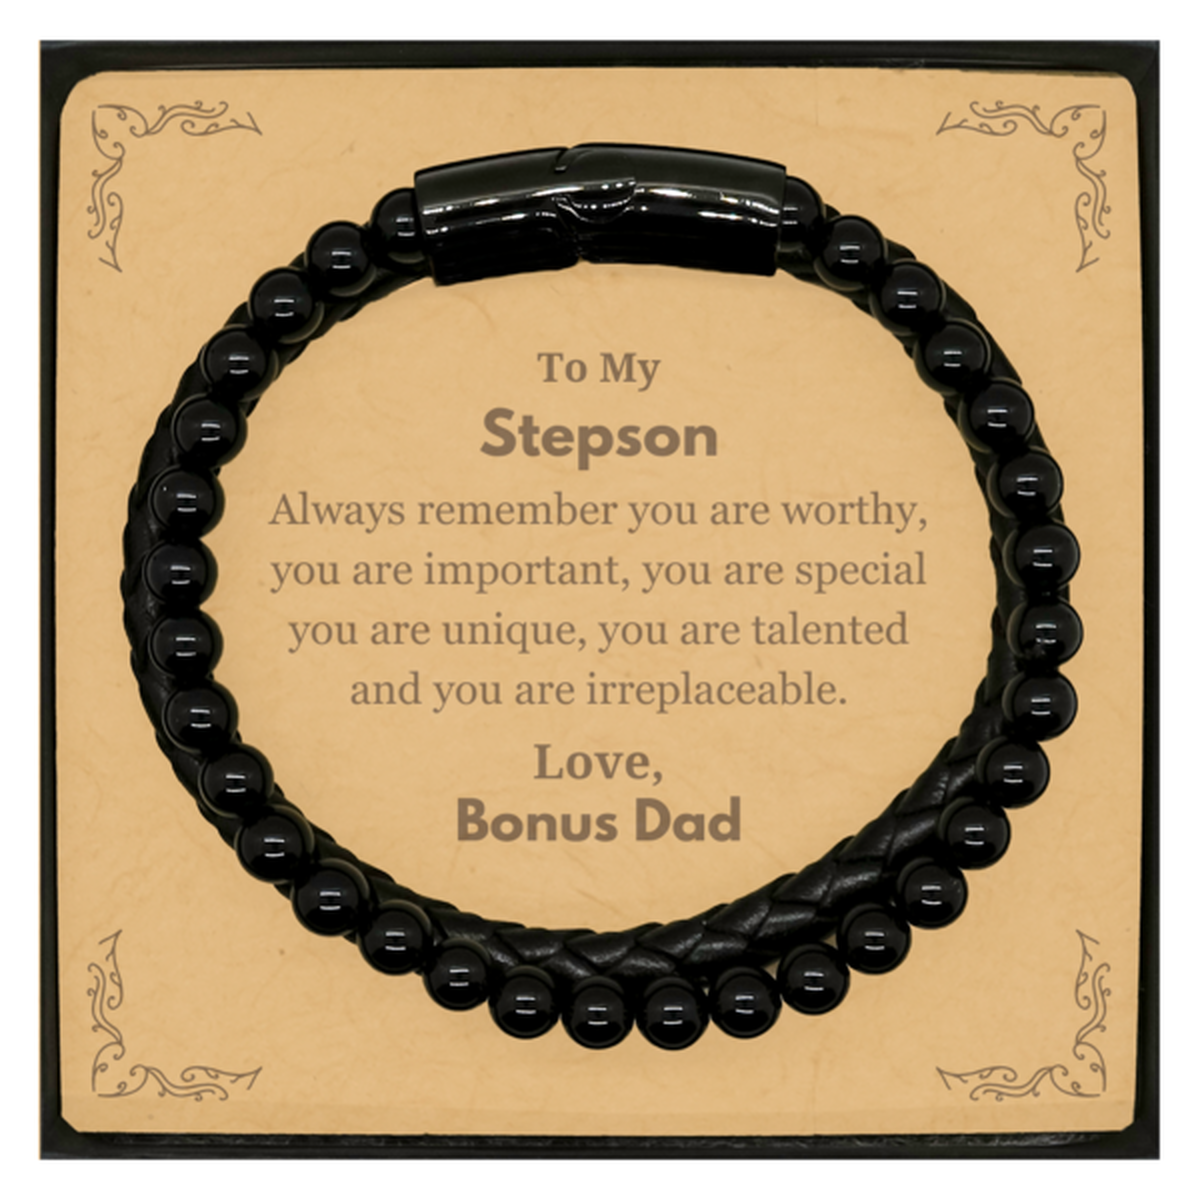 Stepson Birthday Gifts from Bonus Dad, Inspirational Stone Leather Bracelets for Stepson Christmas Graduation Gifts for Stepson Always remember you are worthy, you are important. Love, Bonus Dad